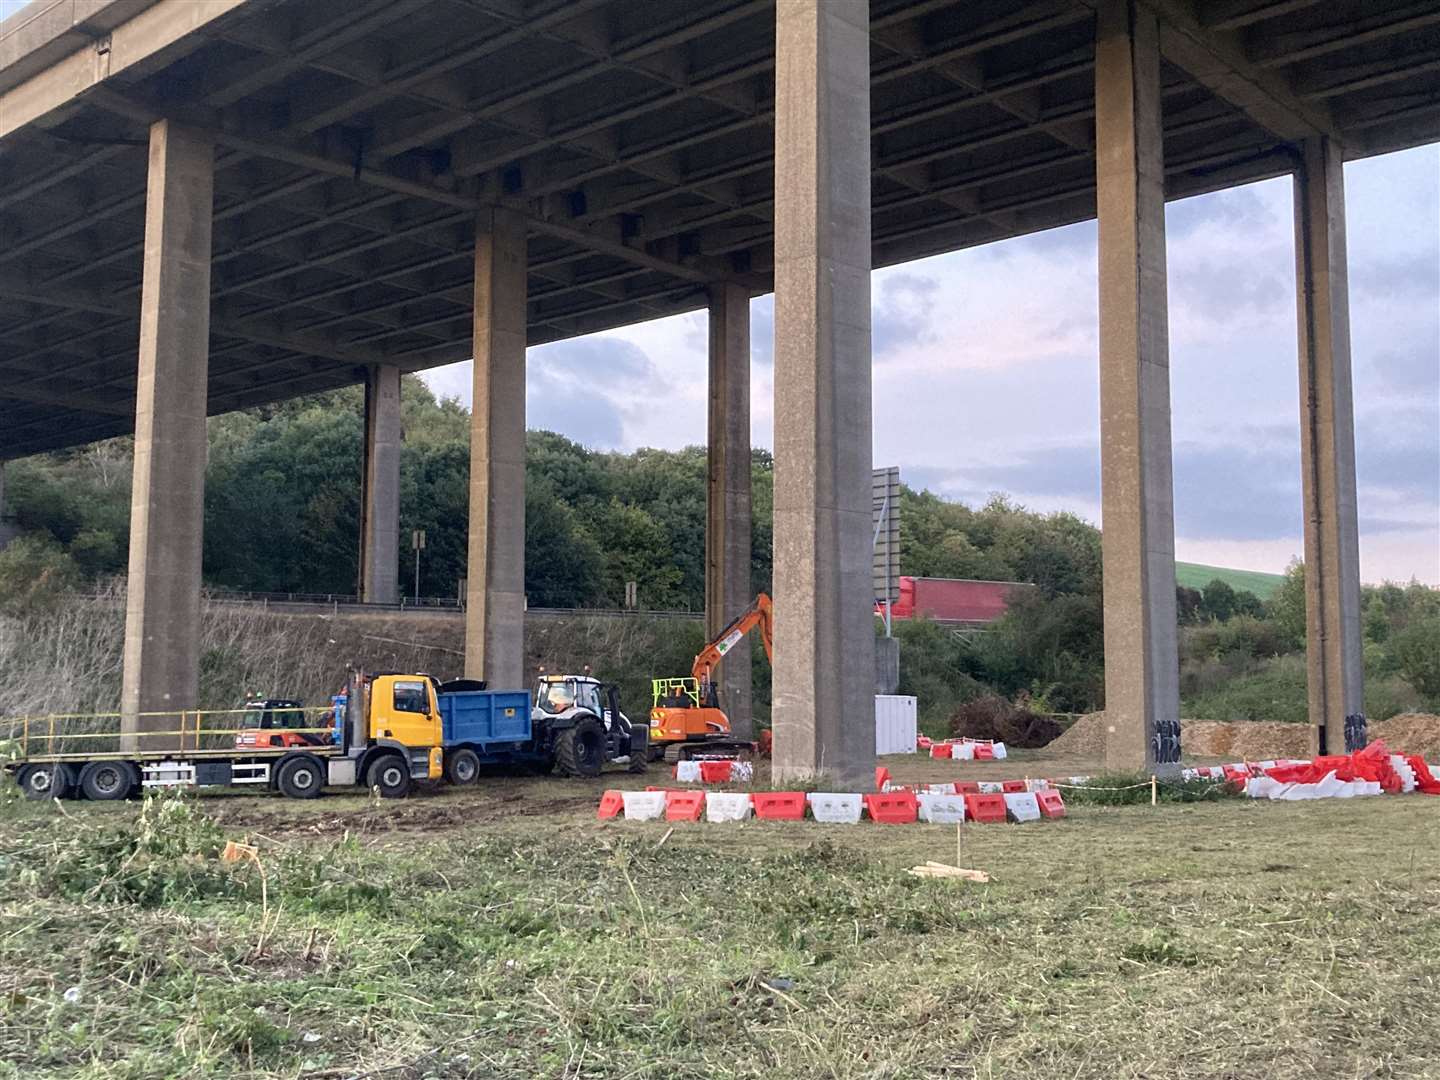 Preparatory work has begun at Stockbury Roundabout for a new flyover